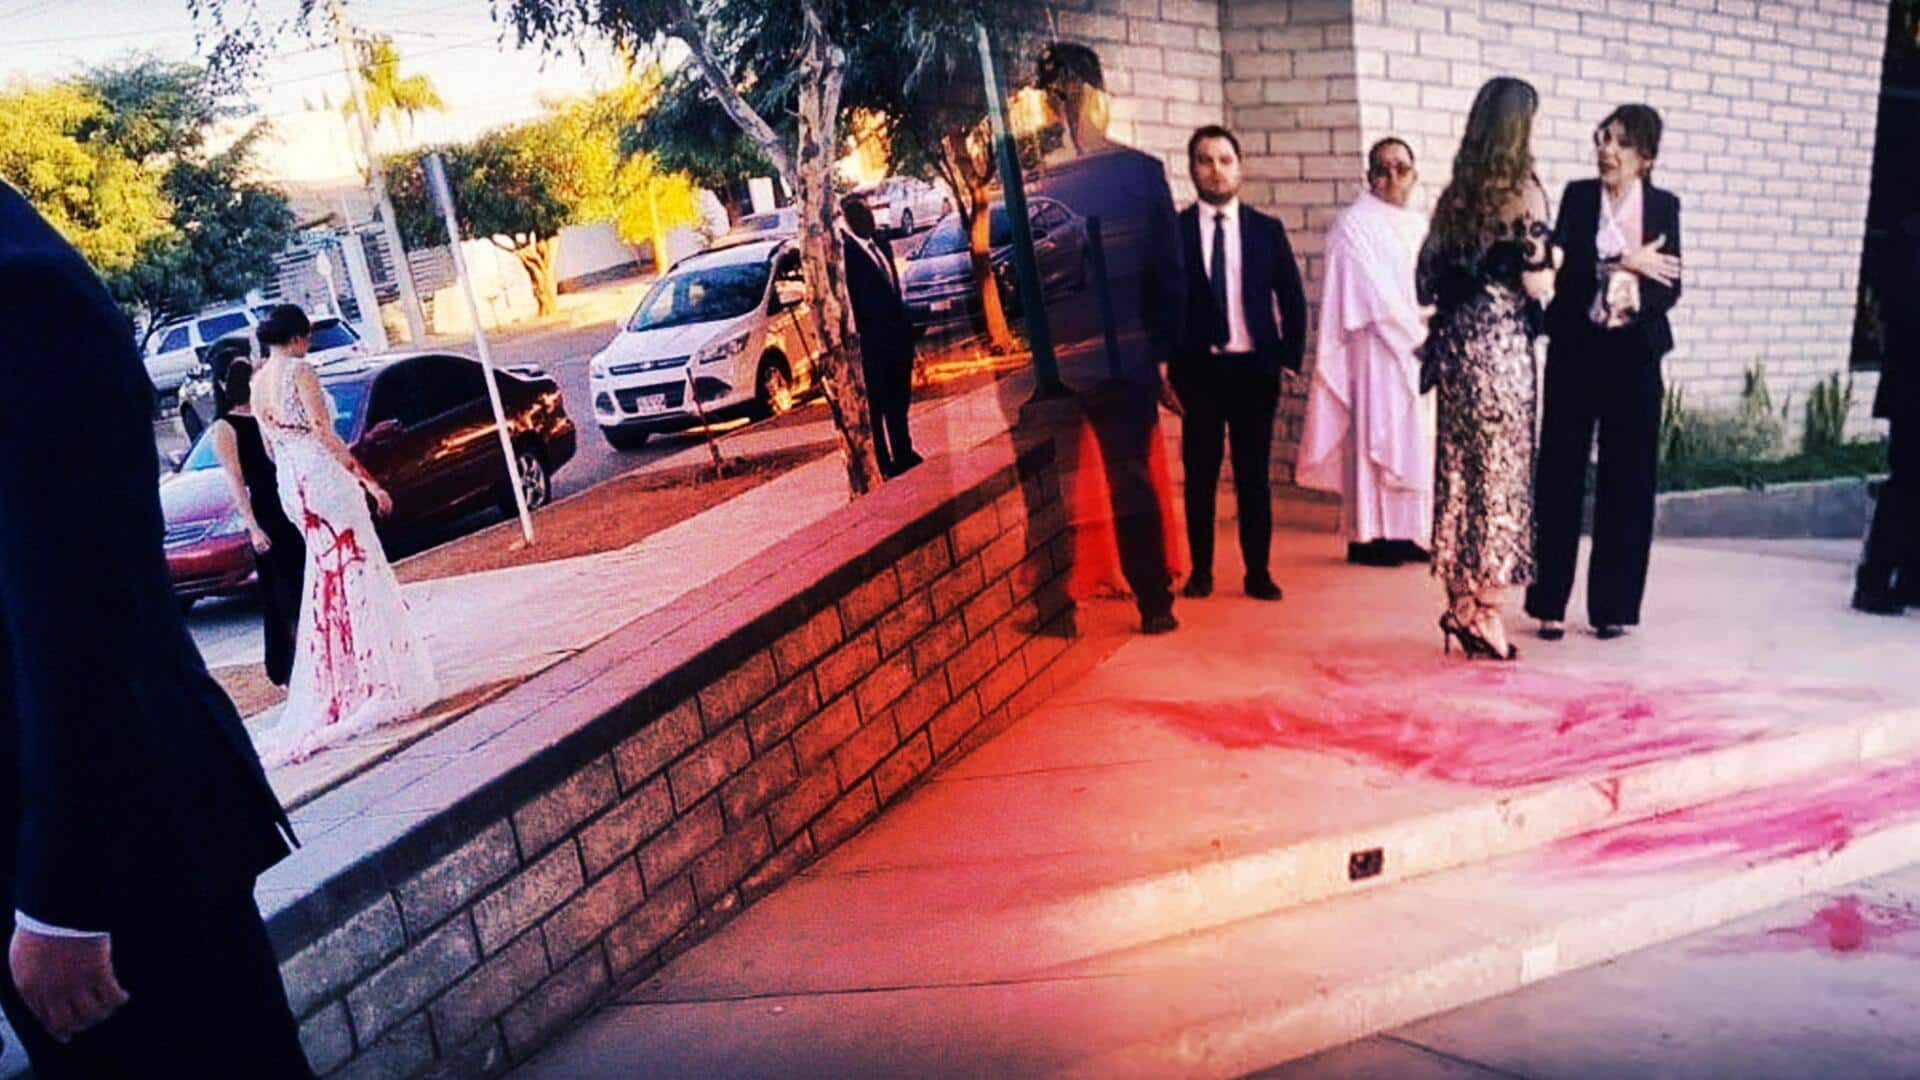 Mexico: Groom's family sabotages wedding, red paint thrown at bride